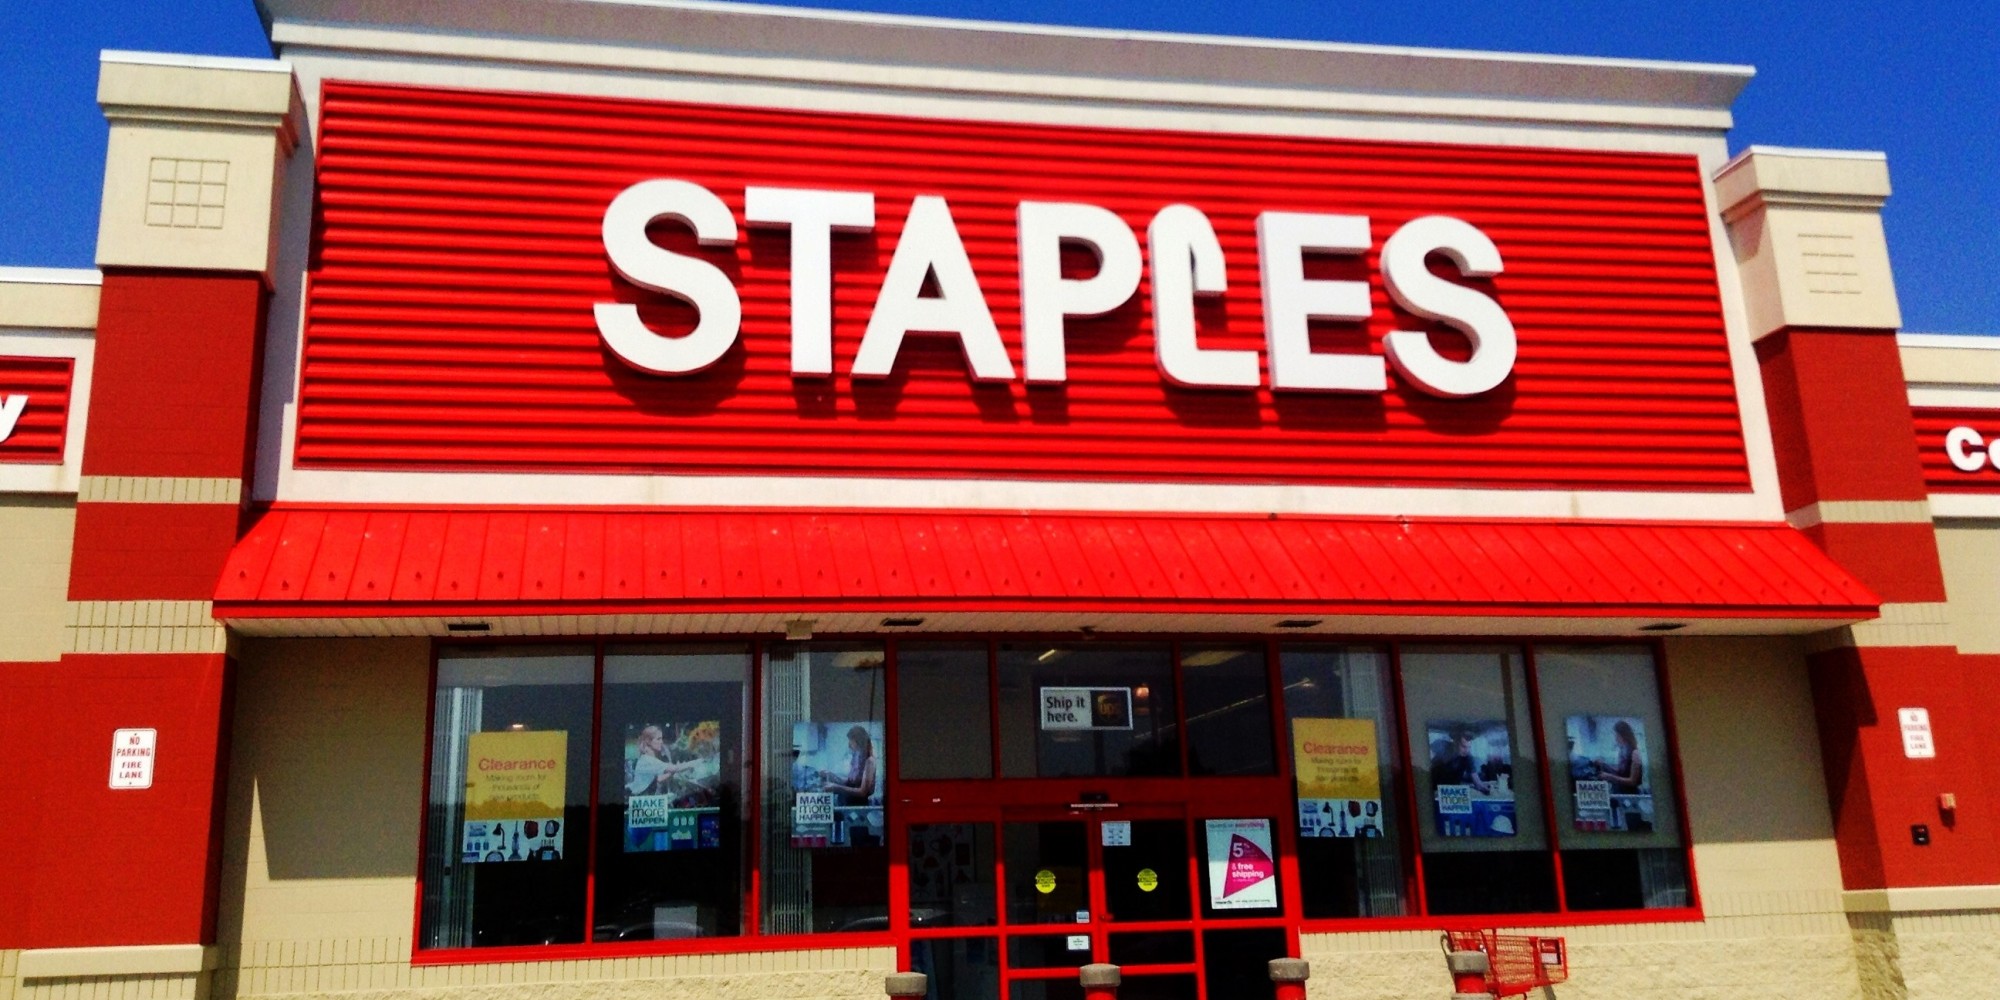 I used to work for Staples store, and I was told to only tell customers that we have the laptop or desktop in stock IF they want to buy additional installation services from us. (The reason for that is because Staples, Office Depot or Best buy, they all make money on those services, that's also the reason why they cut down the price tag and call it on sale/discount.)
if a customer says they're only interested on buying the unit itself, then I would go inside the storage, the techie stuff are locked so the manager would open the door for me and we both hang out there for 15mins then go out and tell the customers - we don't have it in stock.. you know because it's "on sale" it's sold. out..
Tip: is to tell the technician or sales person that you are interested in installing the MS word or do the windows update service (which you can do by yourself at home) and specifically tell them you want to see the box first before they install any of the software. Once they bring out the product for you, and you have it in your hand, tell them you change your mind with the installation service. BECAUSE you are not paying until you get to the cashier, it's not like they can charge you before you have the laptop in your hand. There was one time I witnessed my manager, they will take the product back and say this is actually reserved to another person already. which is F*ing shady and I left that company.